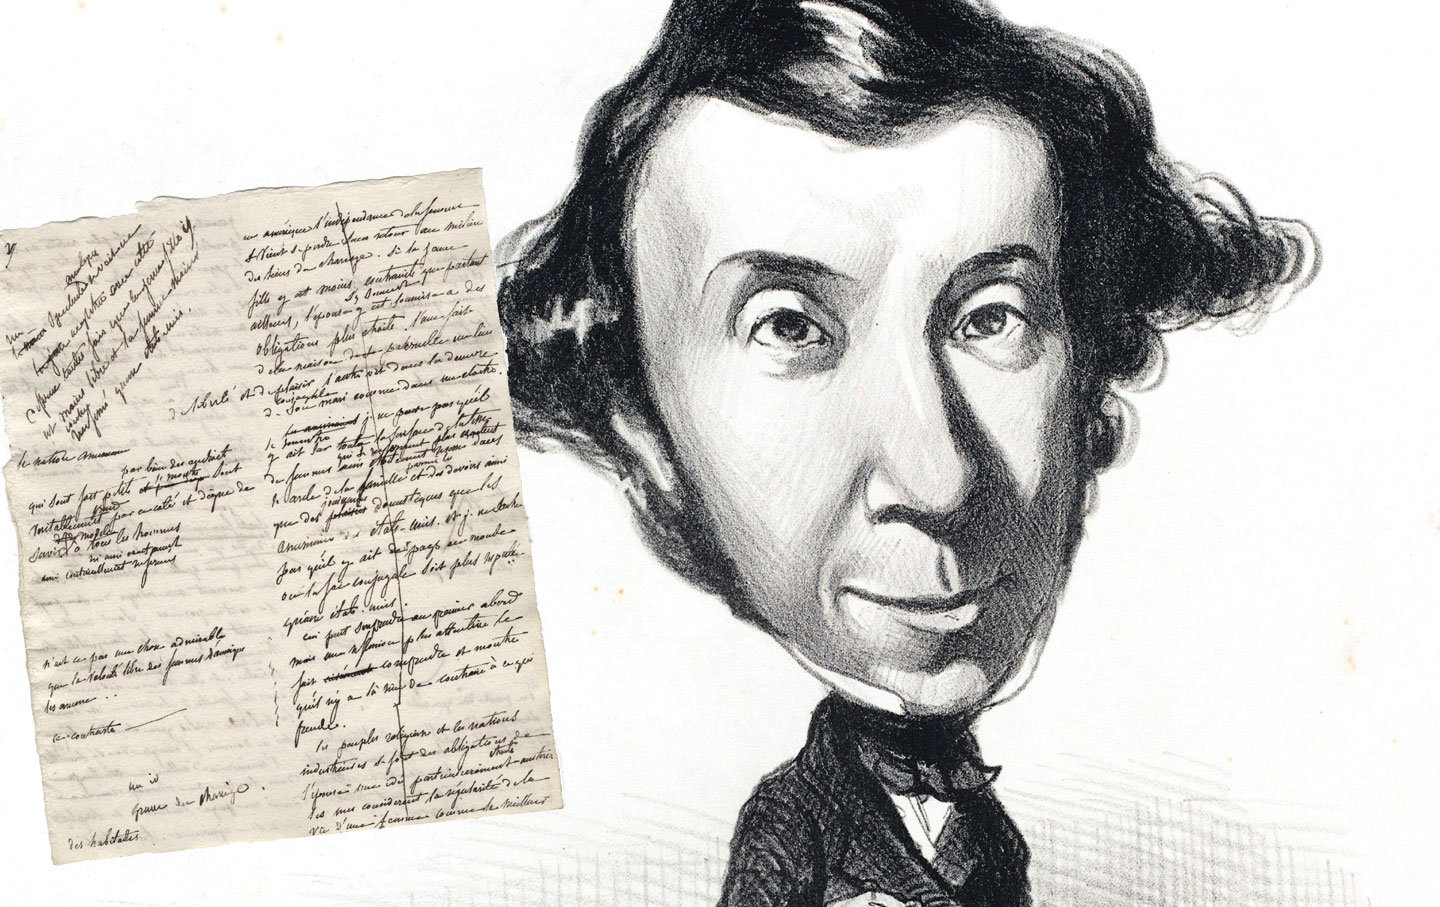 What Would Alexis de Tocqueville Have Made of the 2016 US Presidential Election?